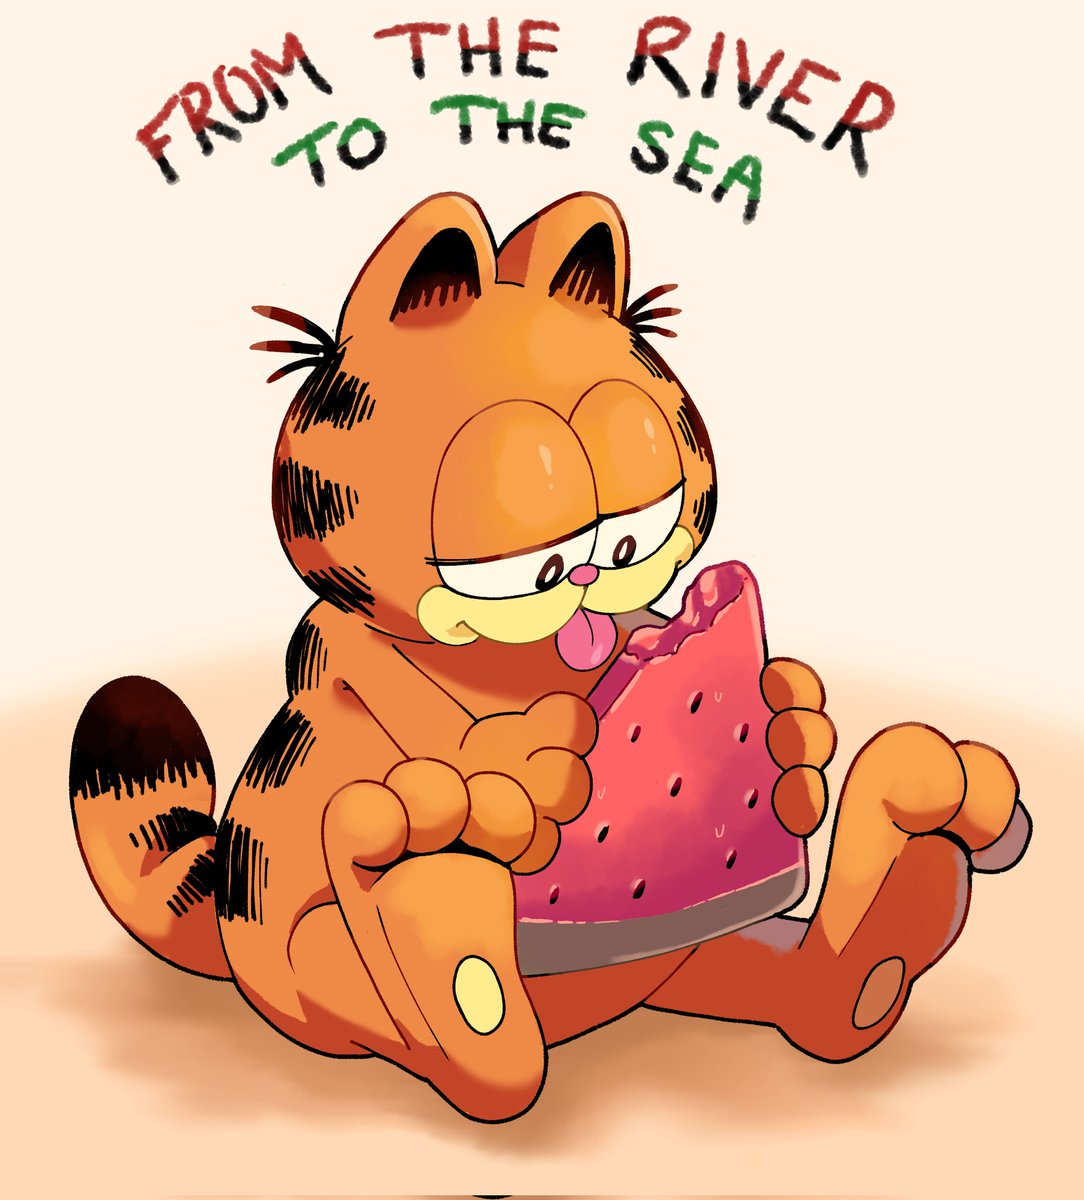 With love from Garfield 🐱🍉 #FreePalestine